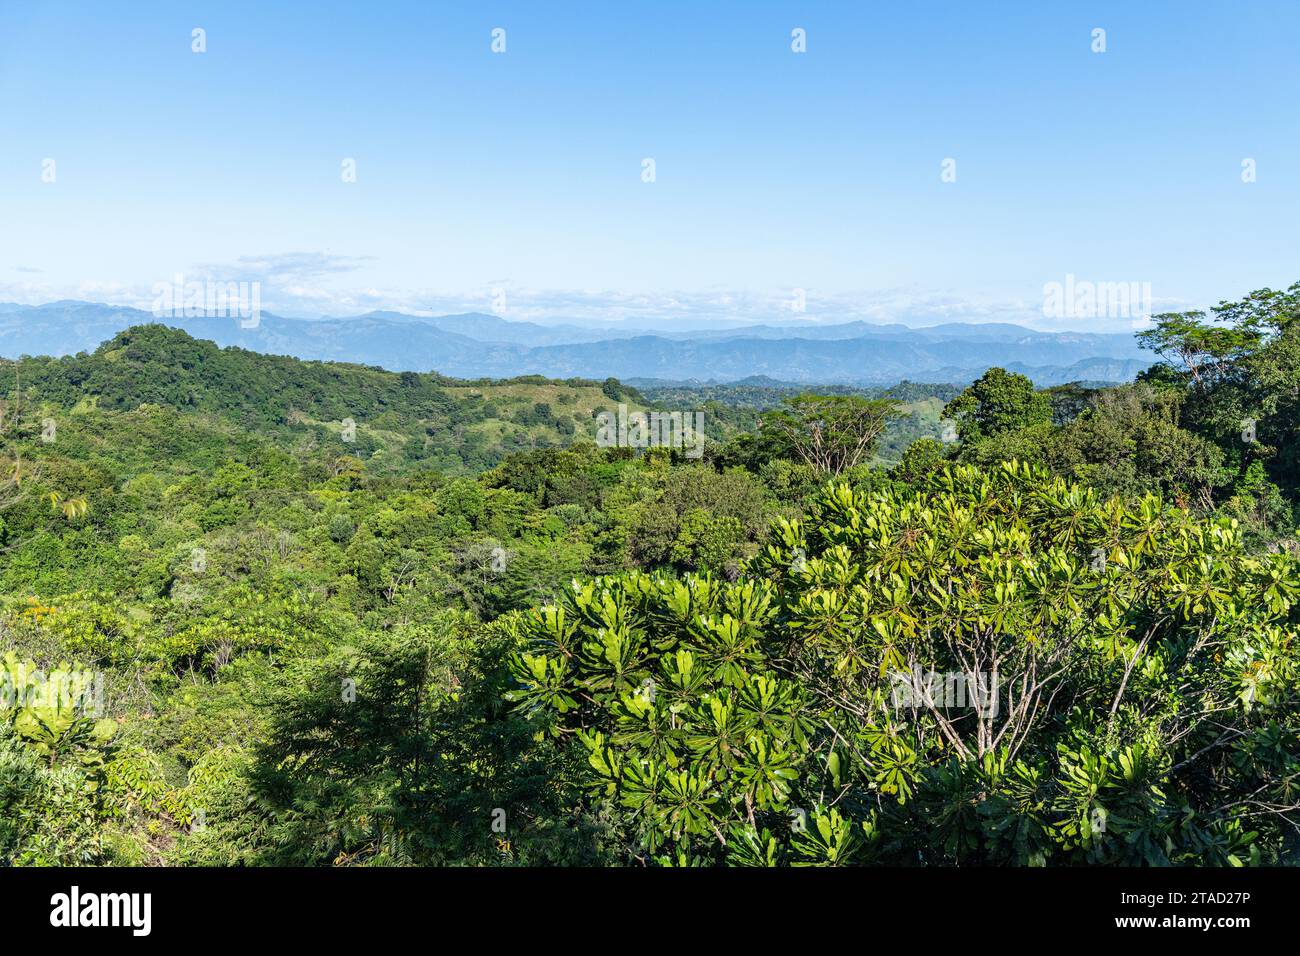 A view of the Colombian countryside forests, jungles and mountains Stock Photo